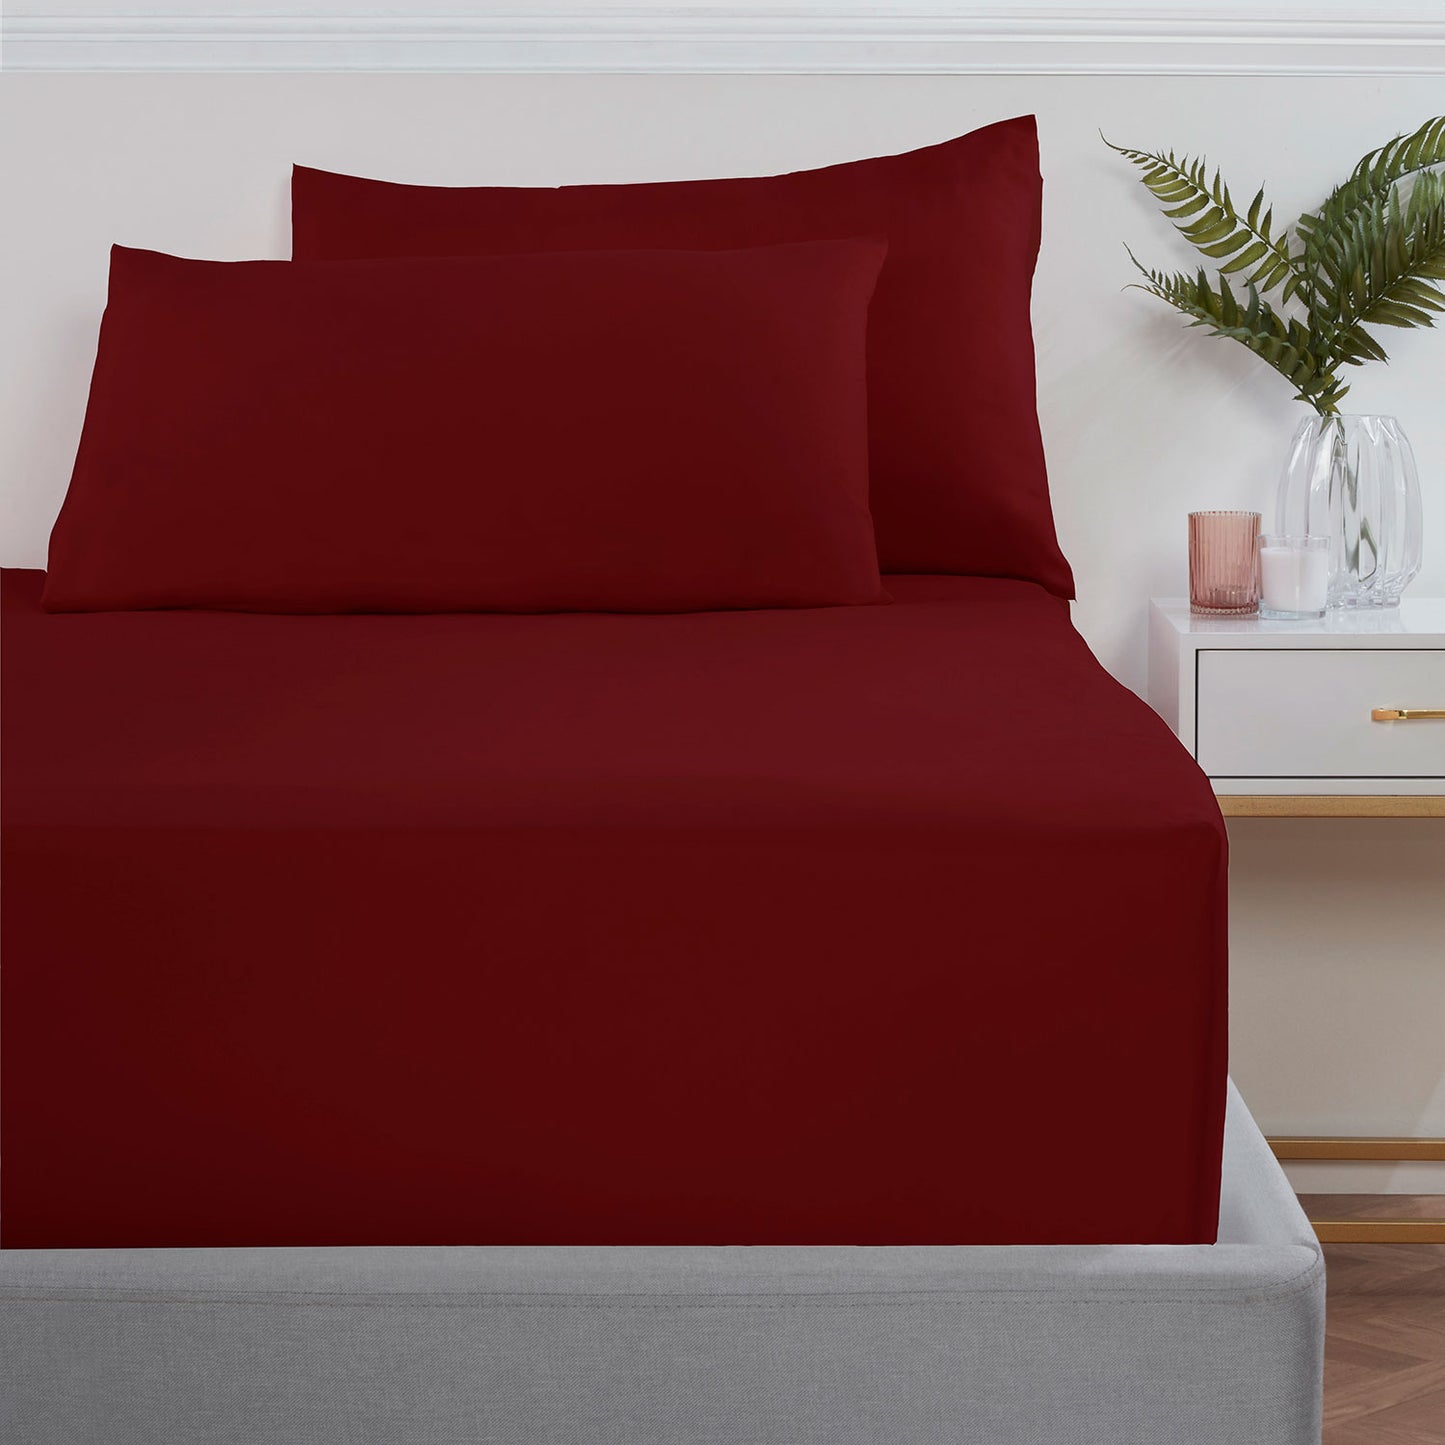 Red Super Soft Easycare Extra Deep (40cm) Fitted Sheet